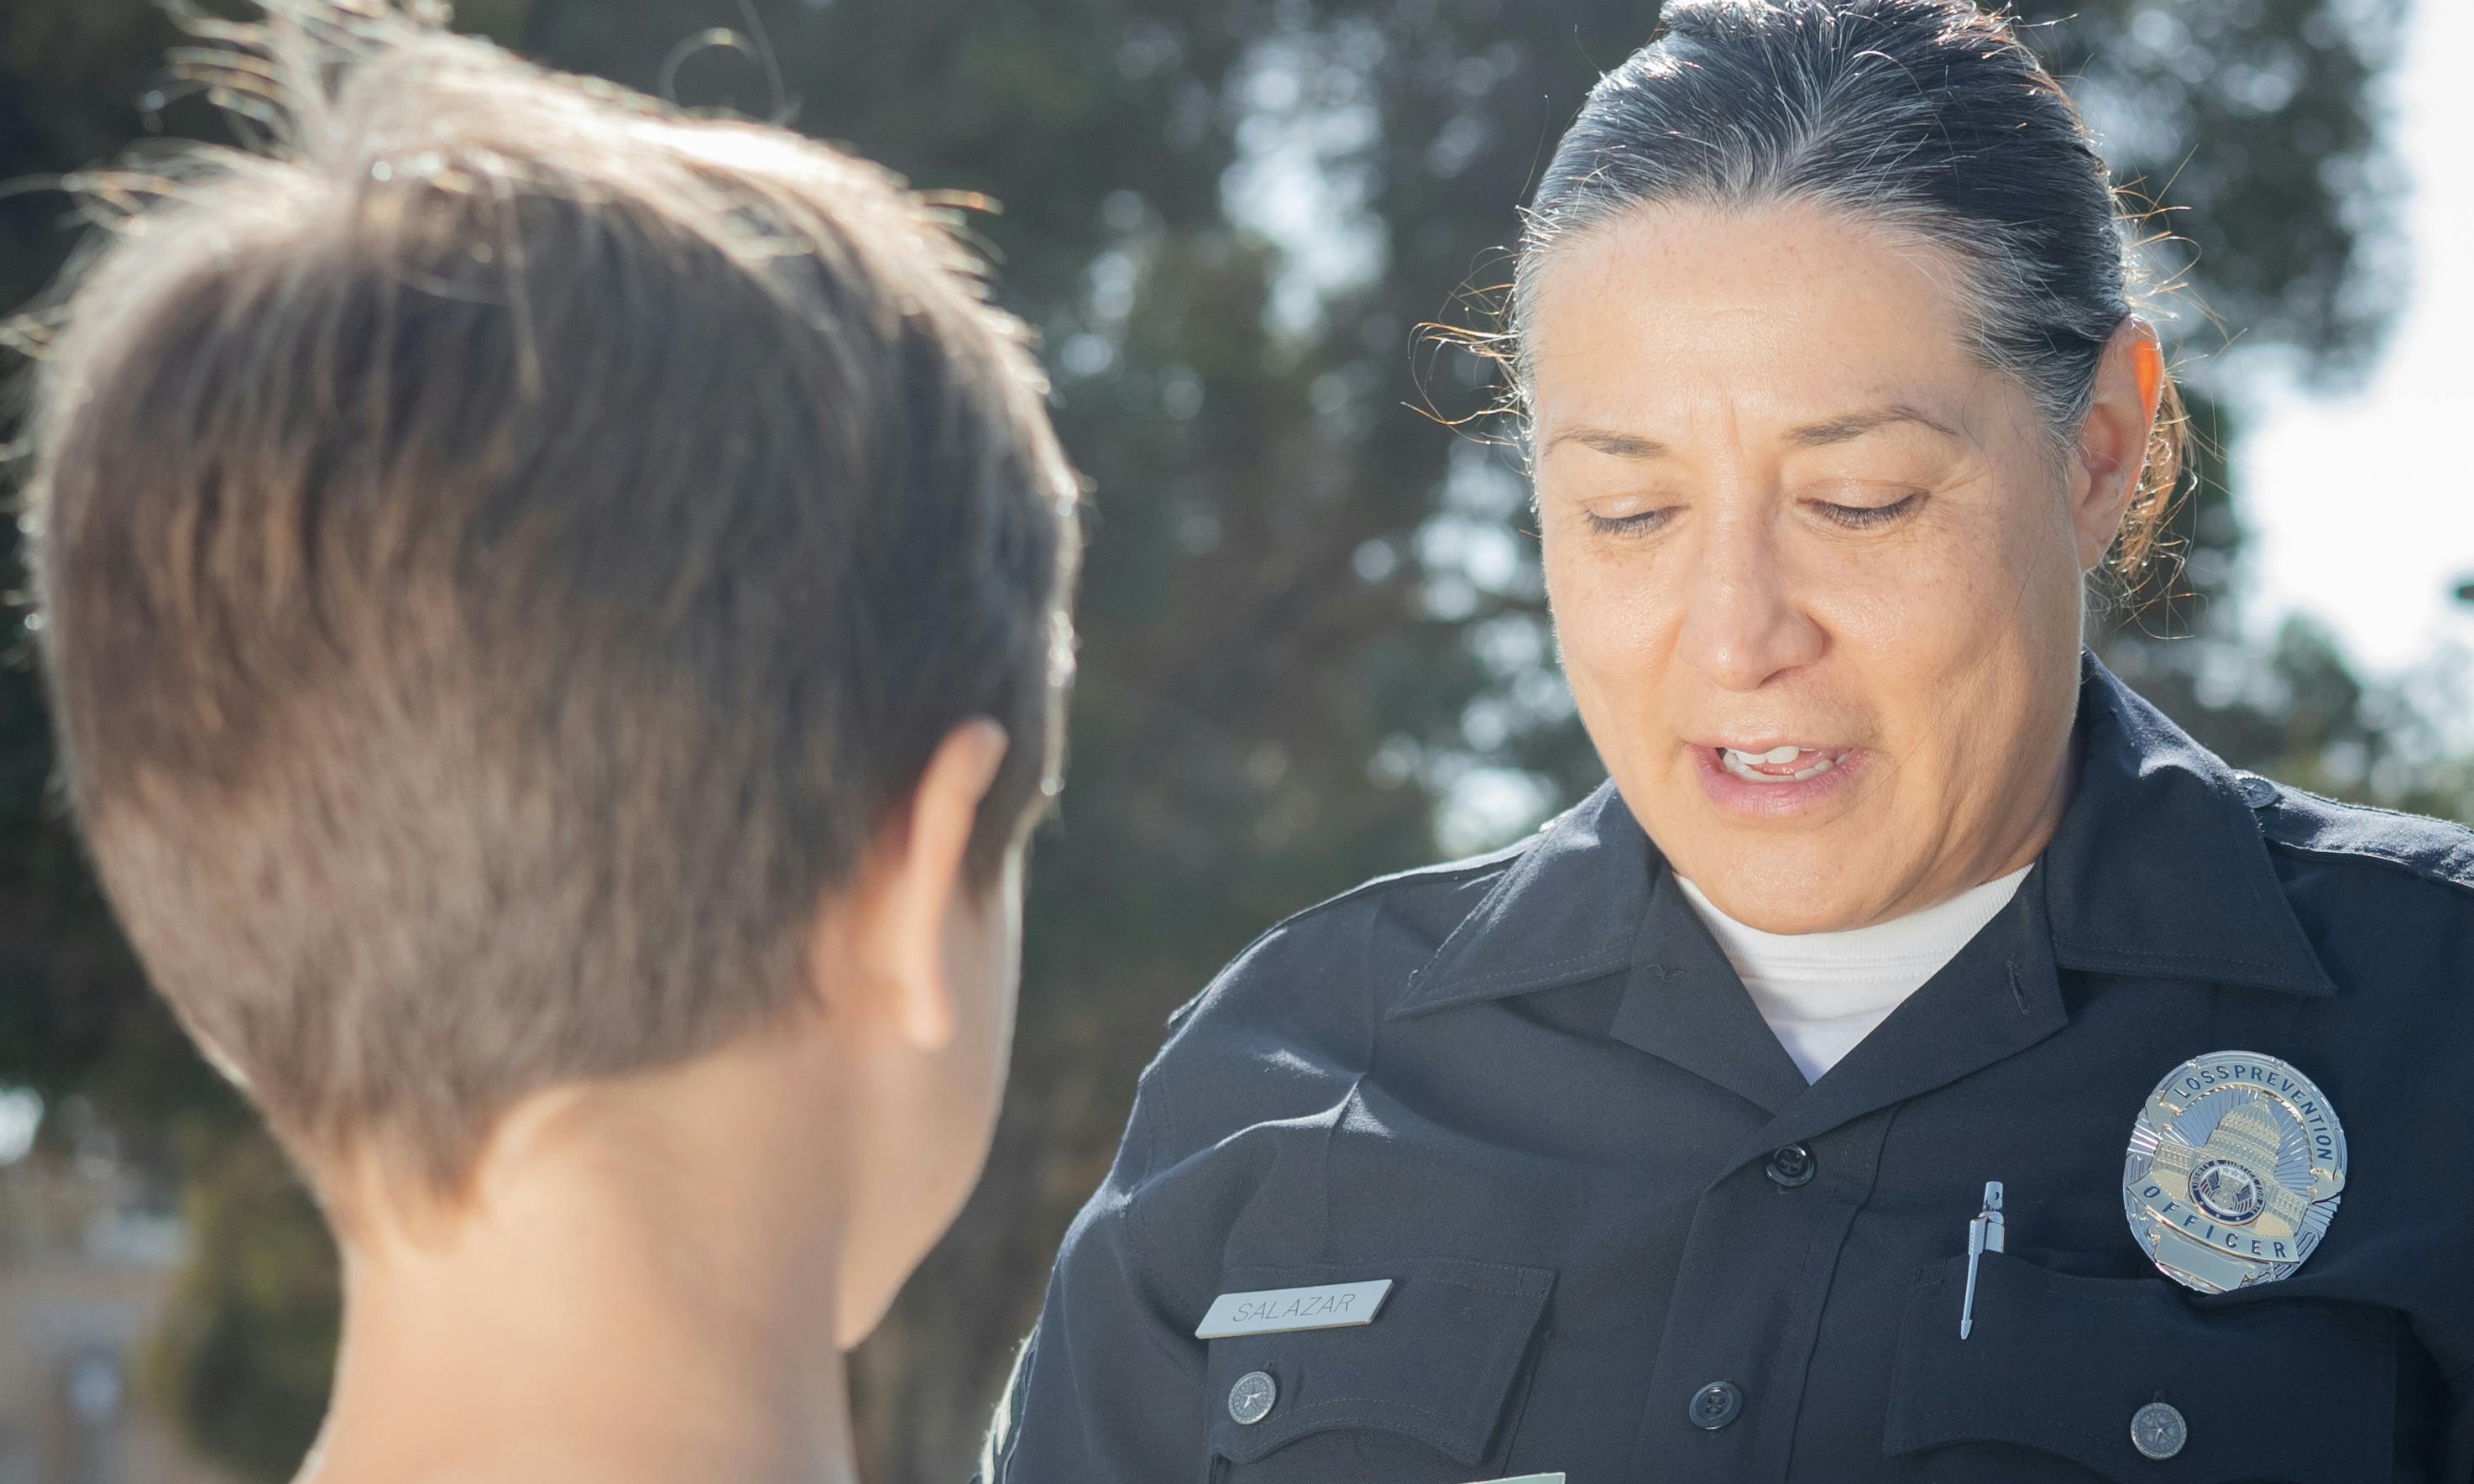 A police officer addresses a young boy | Source: Pexels